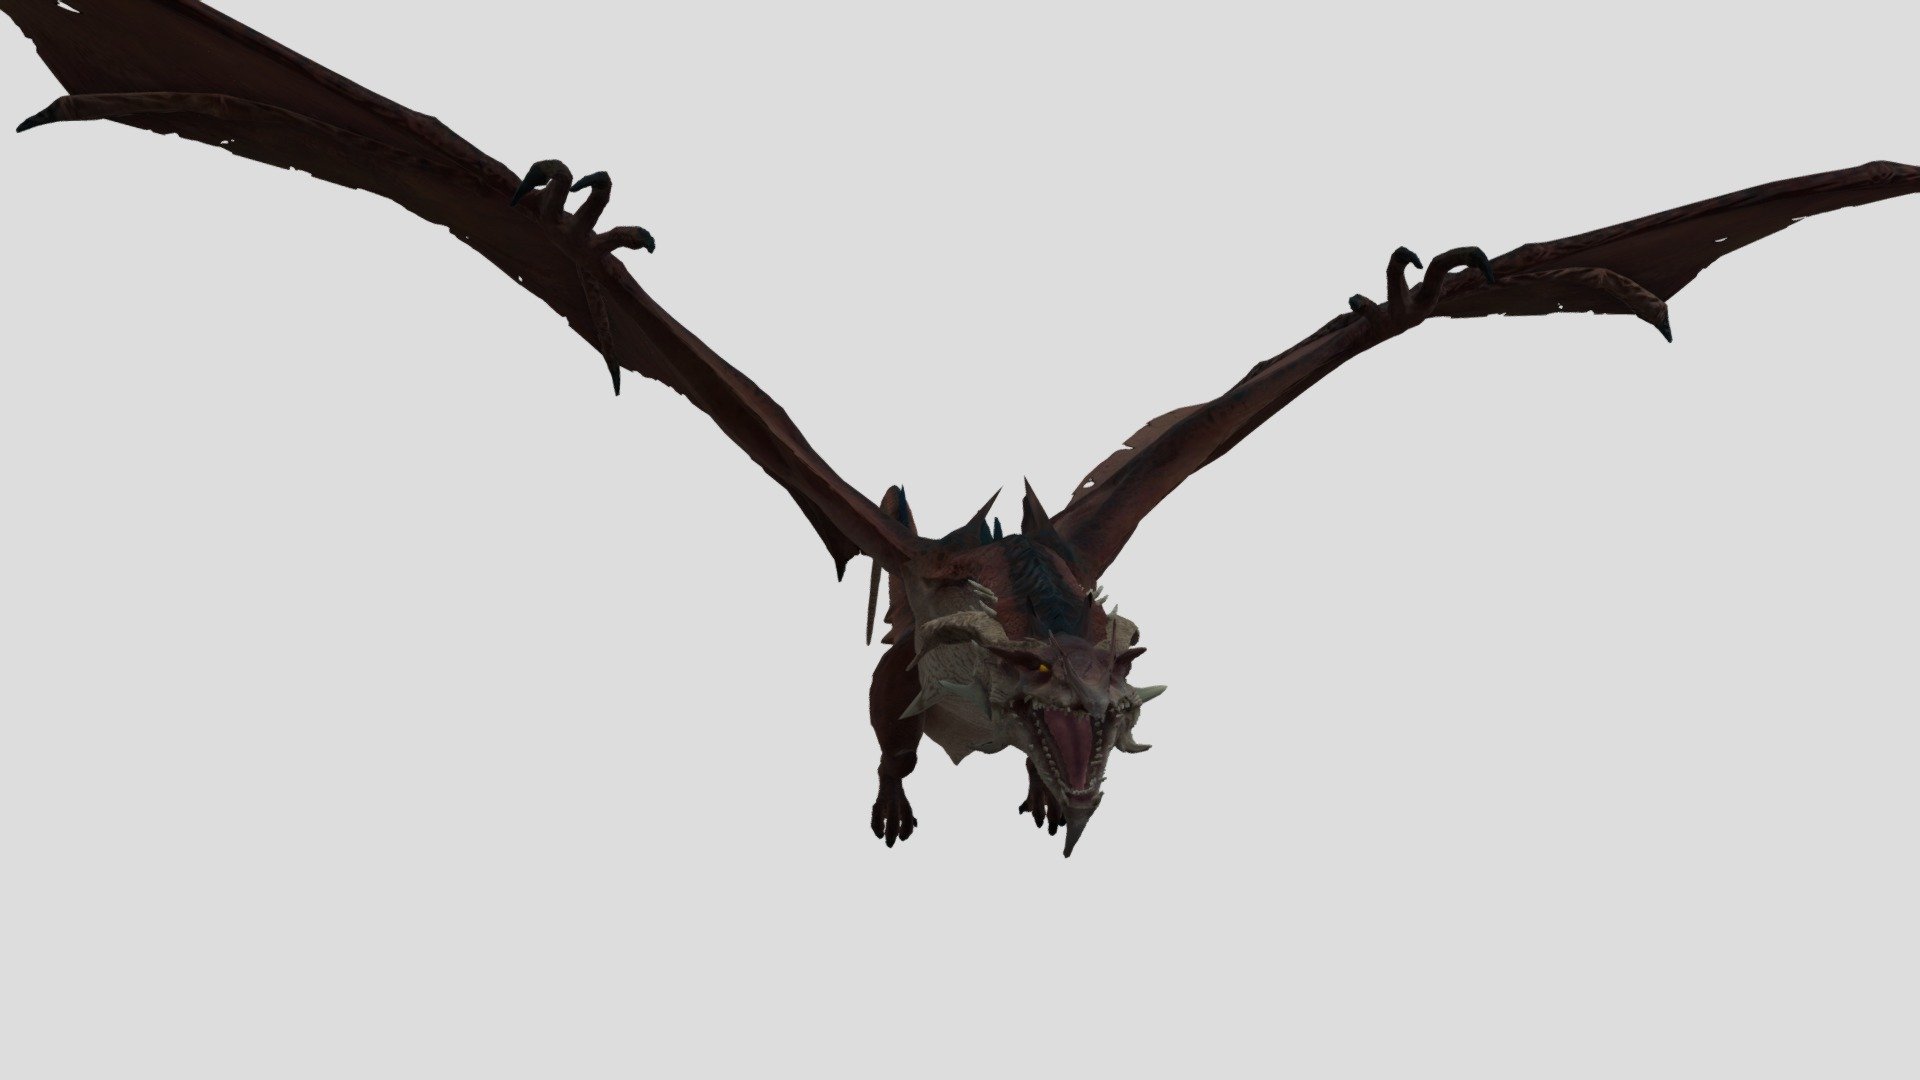 Deamon Dragon animated with all the spikes now also with full colored textures on fulll body perfect for RPG or D&amp;D adventure type games 3d model